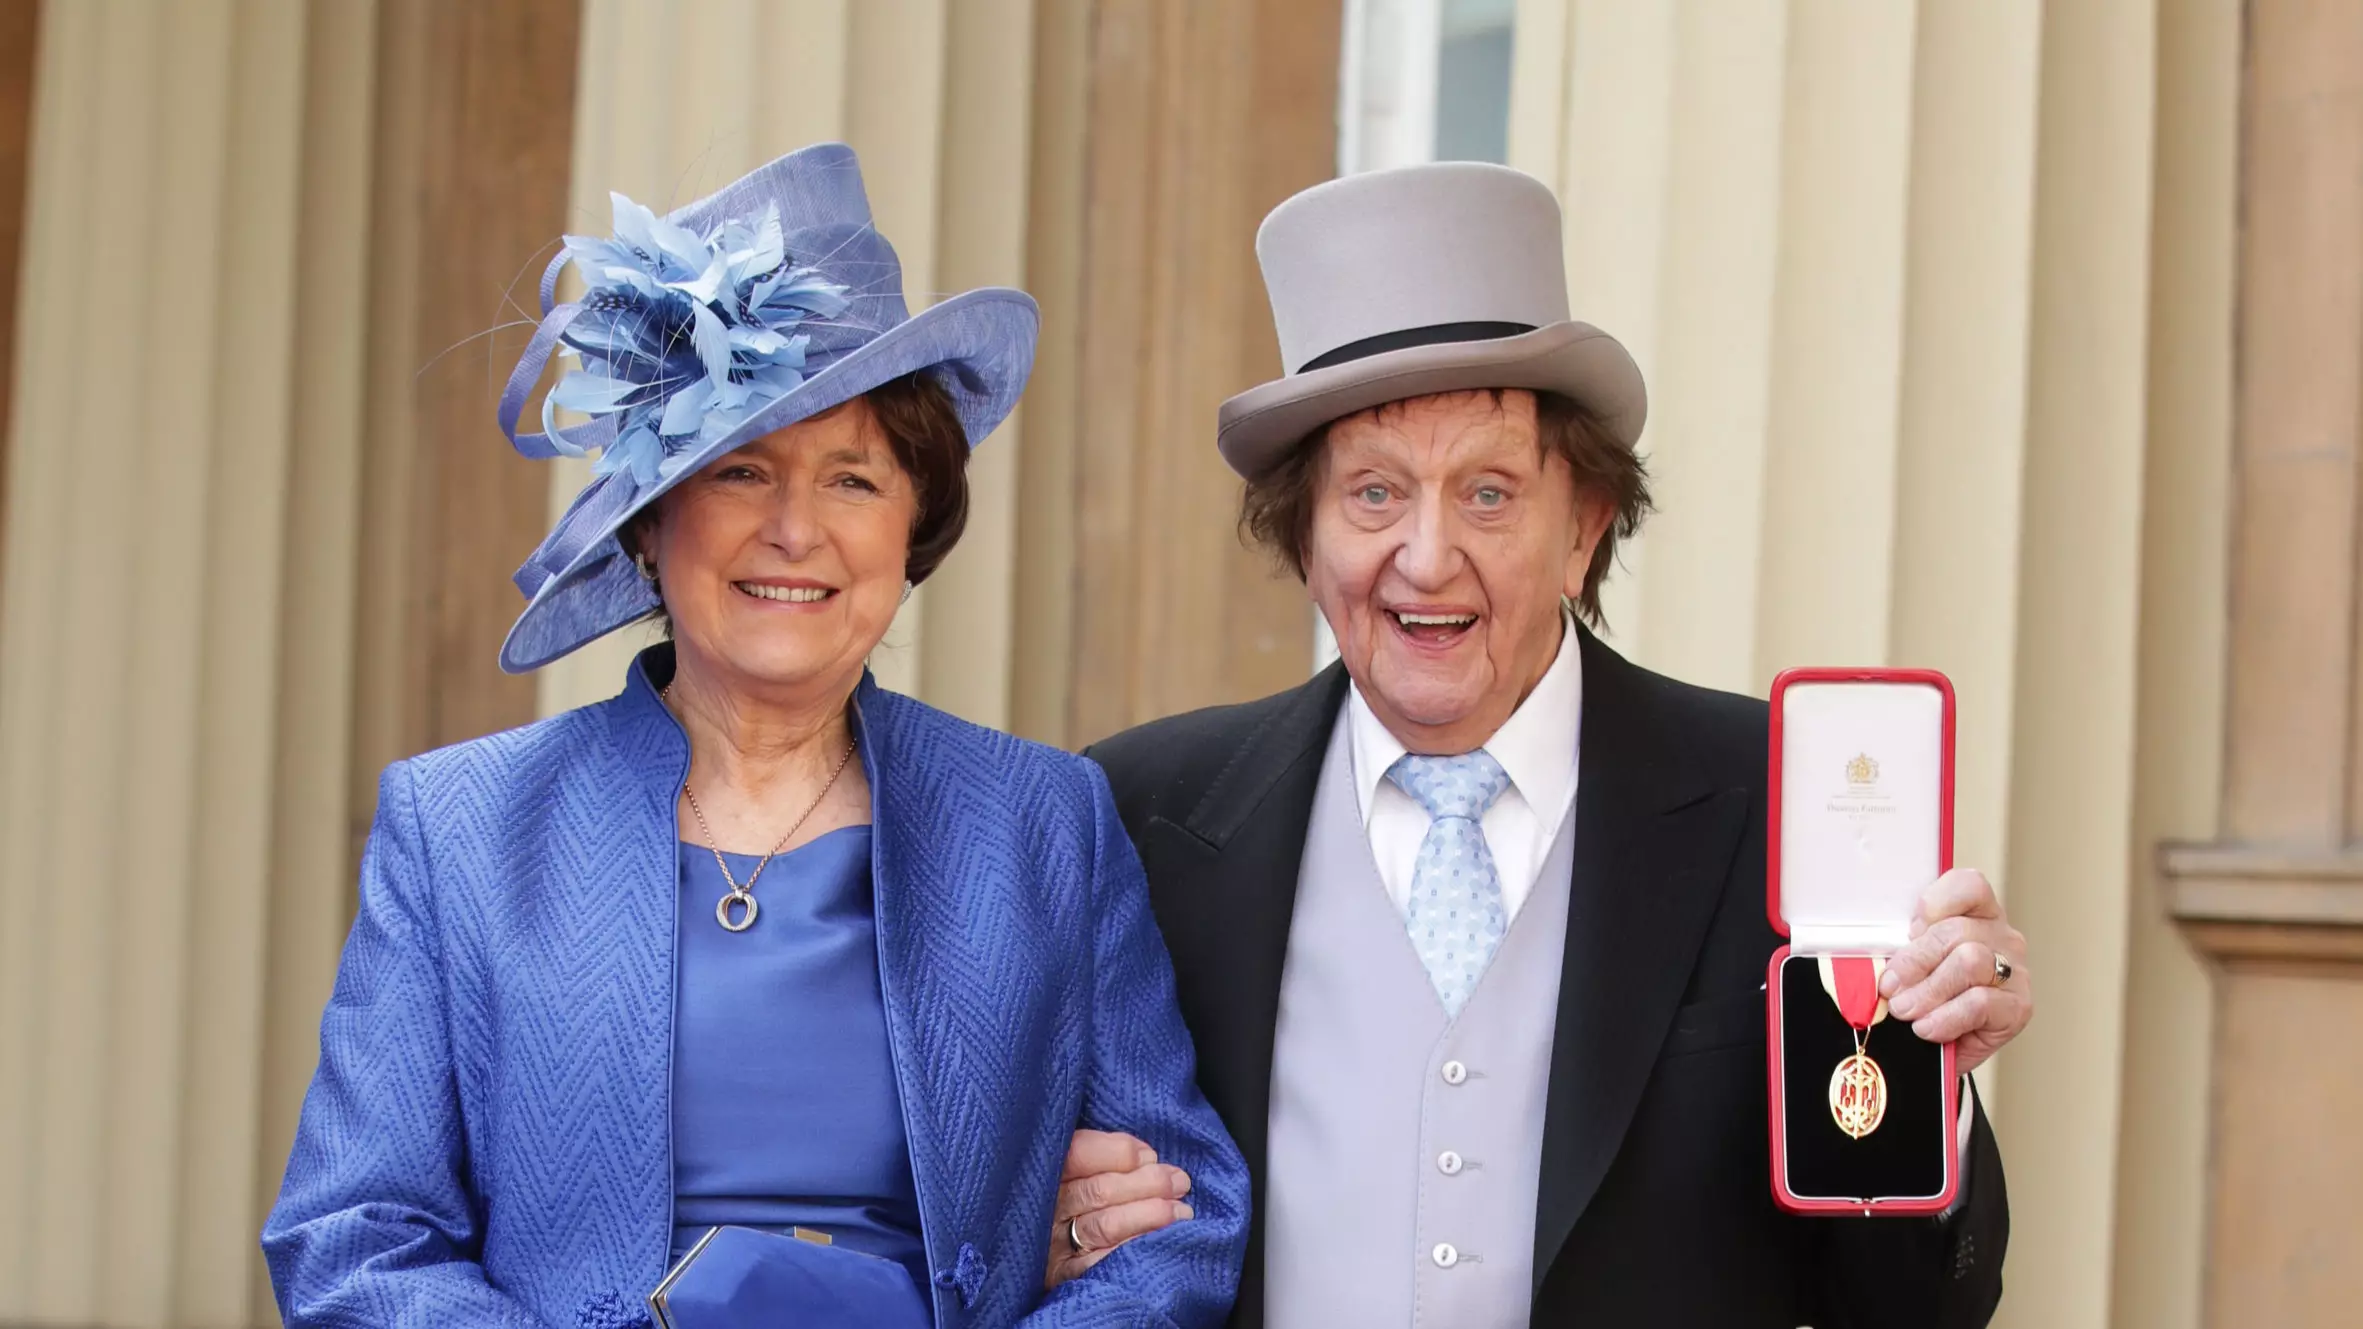 Ken Dodd Marrying Long Time Partner Days Before Death Was A Smart Tax Move